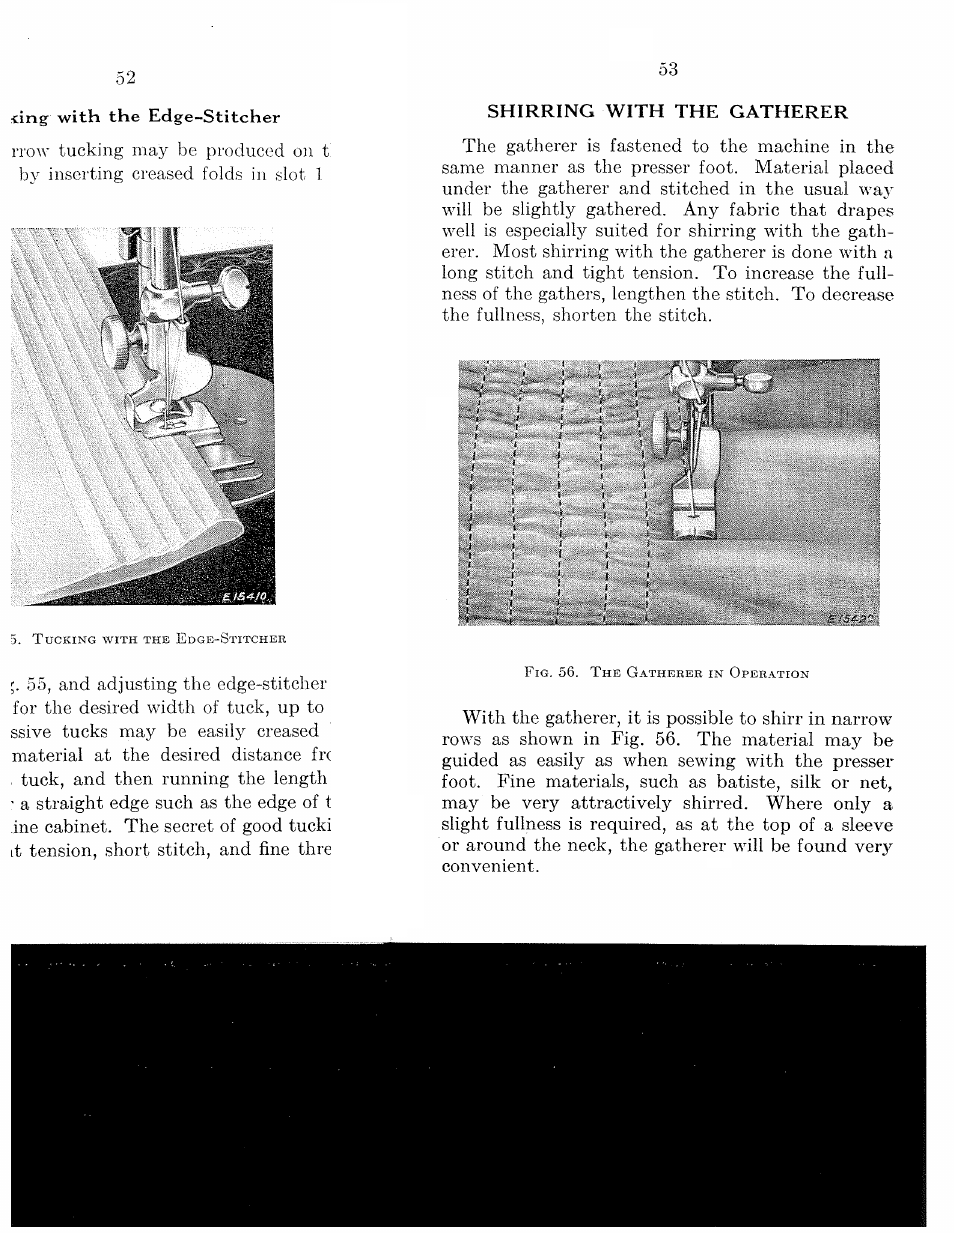 Shirring with the gatherer | SINGER 15-91 User Manual | Page 55 / 68